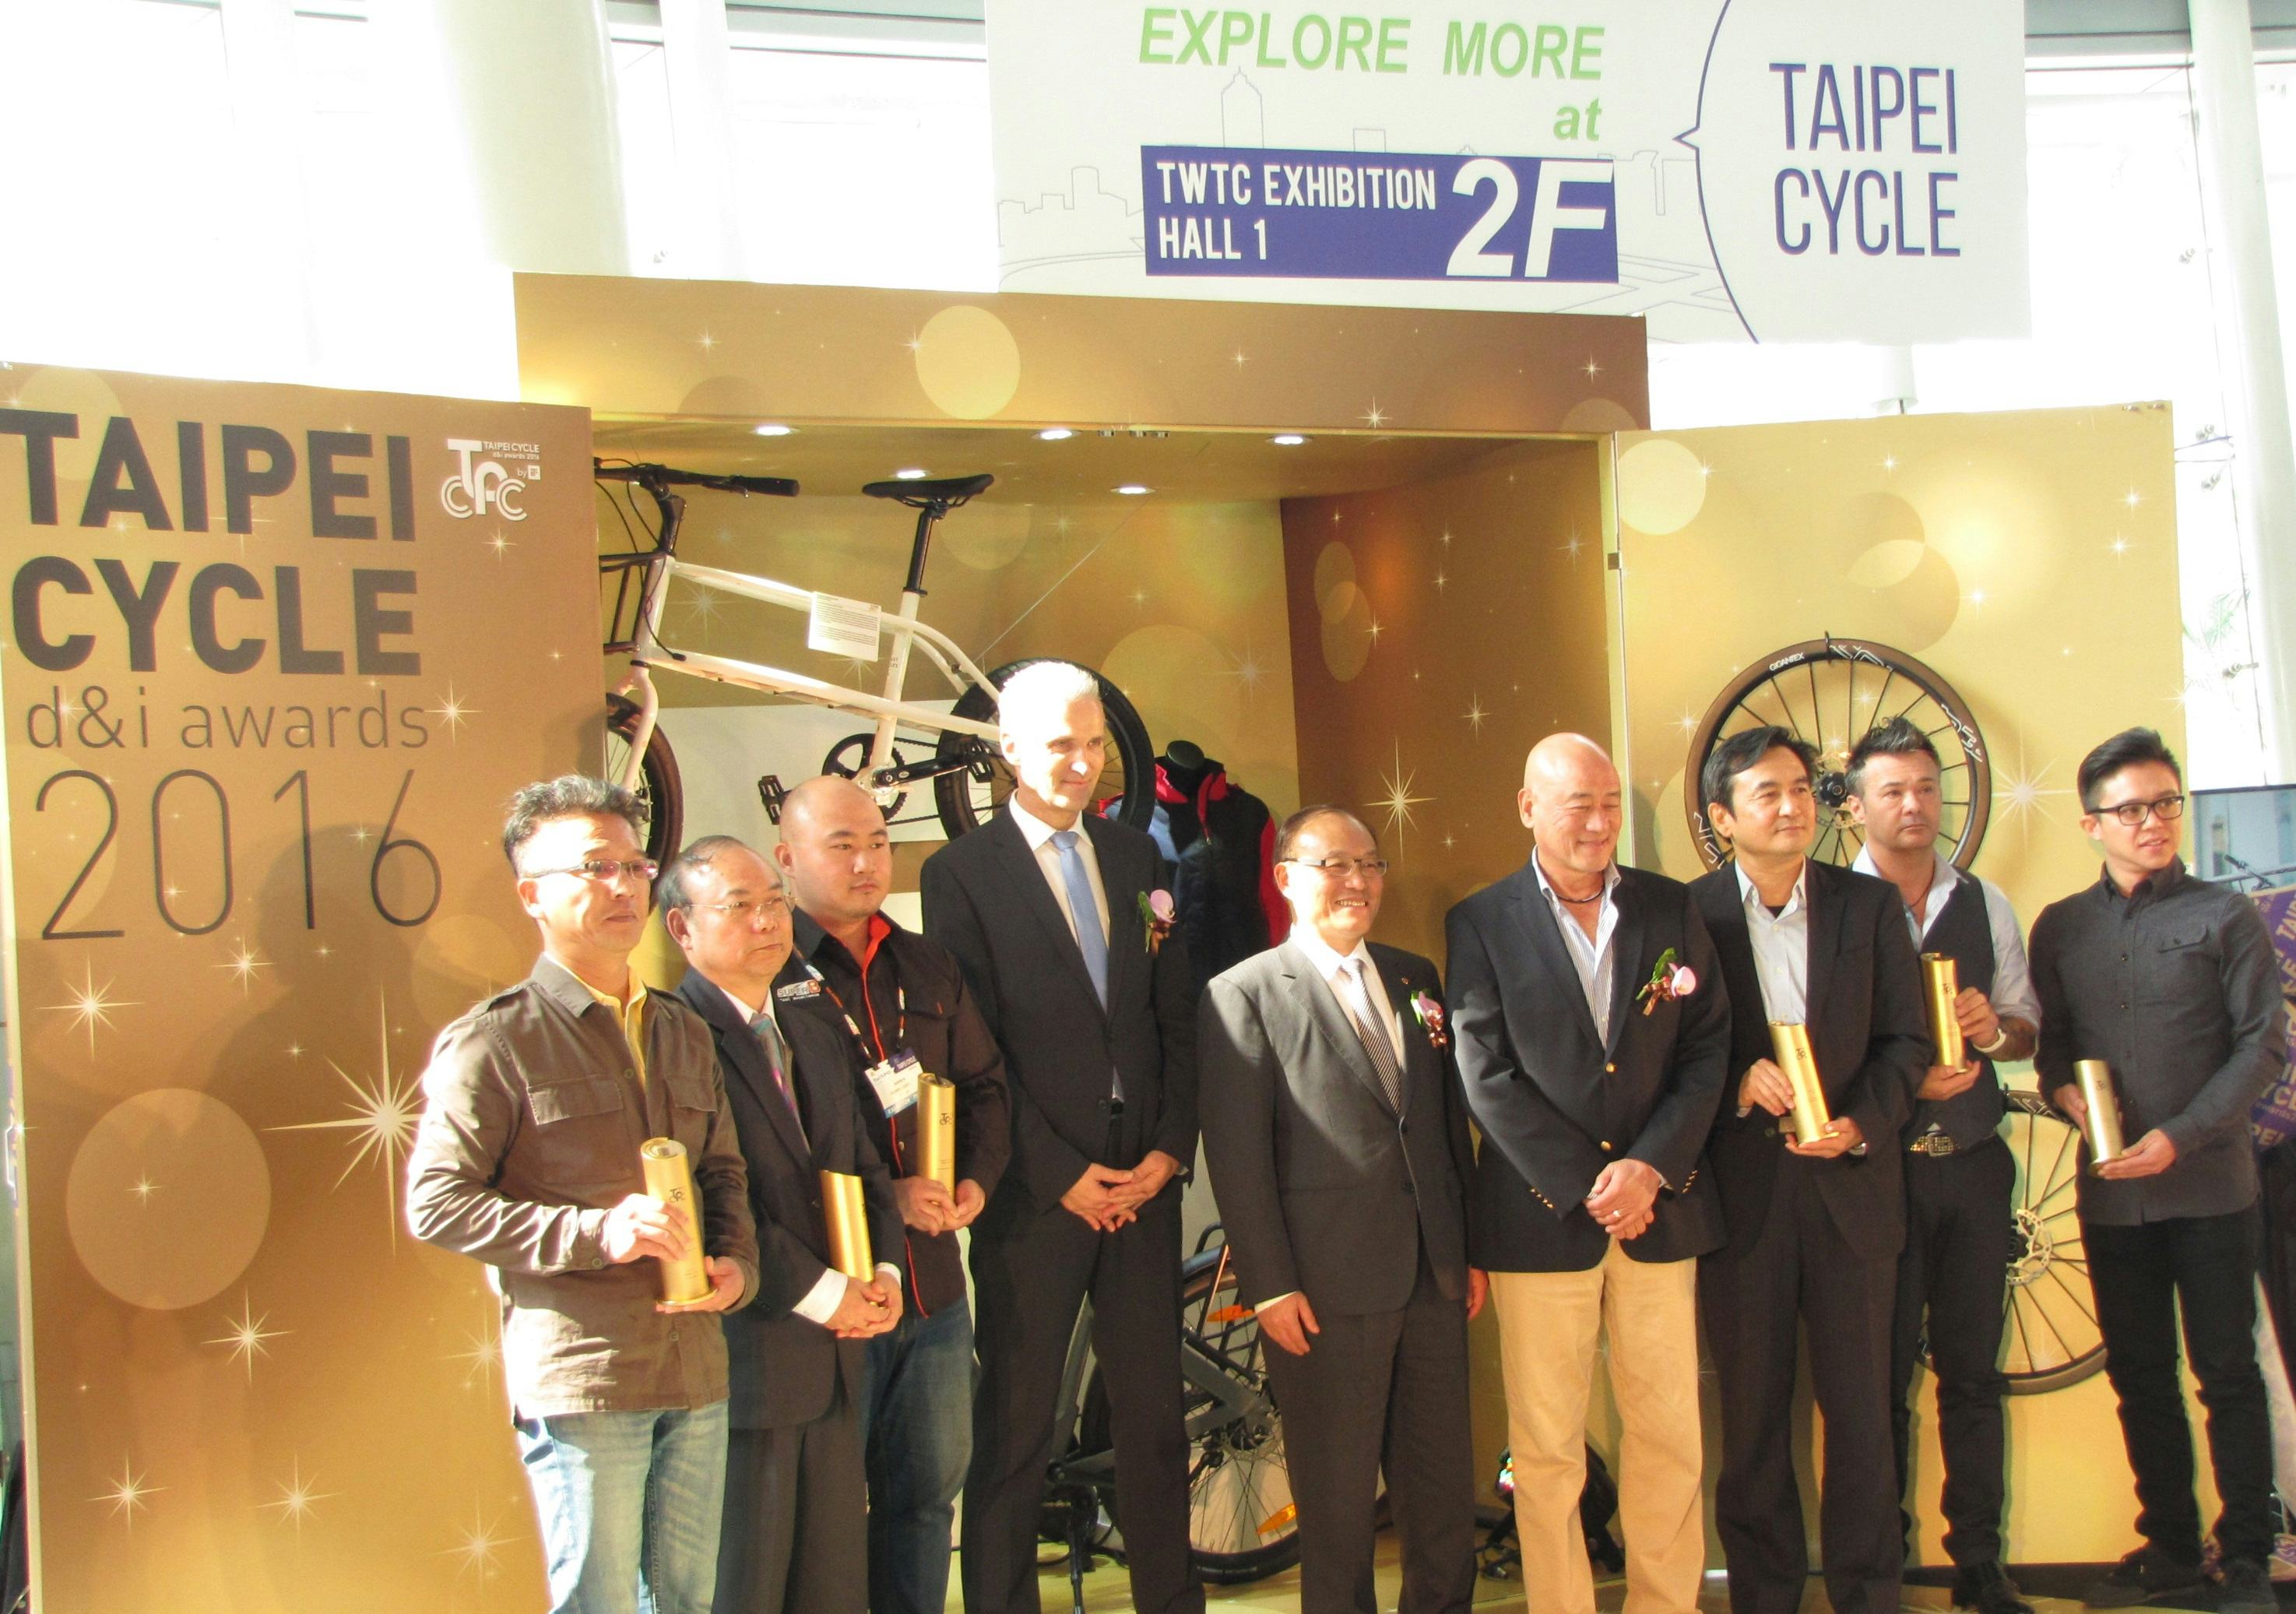 This afternoon the Taipei Cycle d&i Awards as well as six gold awards were handed over to the winners. – Photo Bike Europe